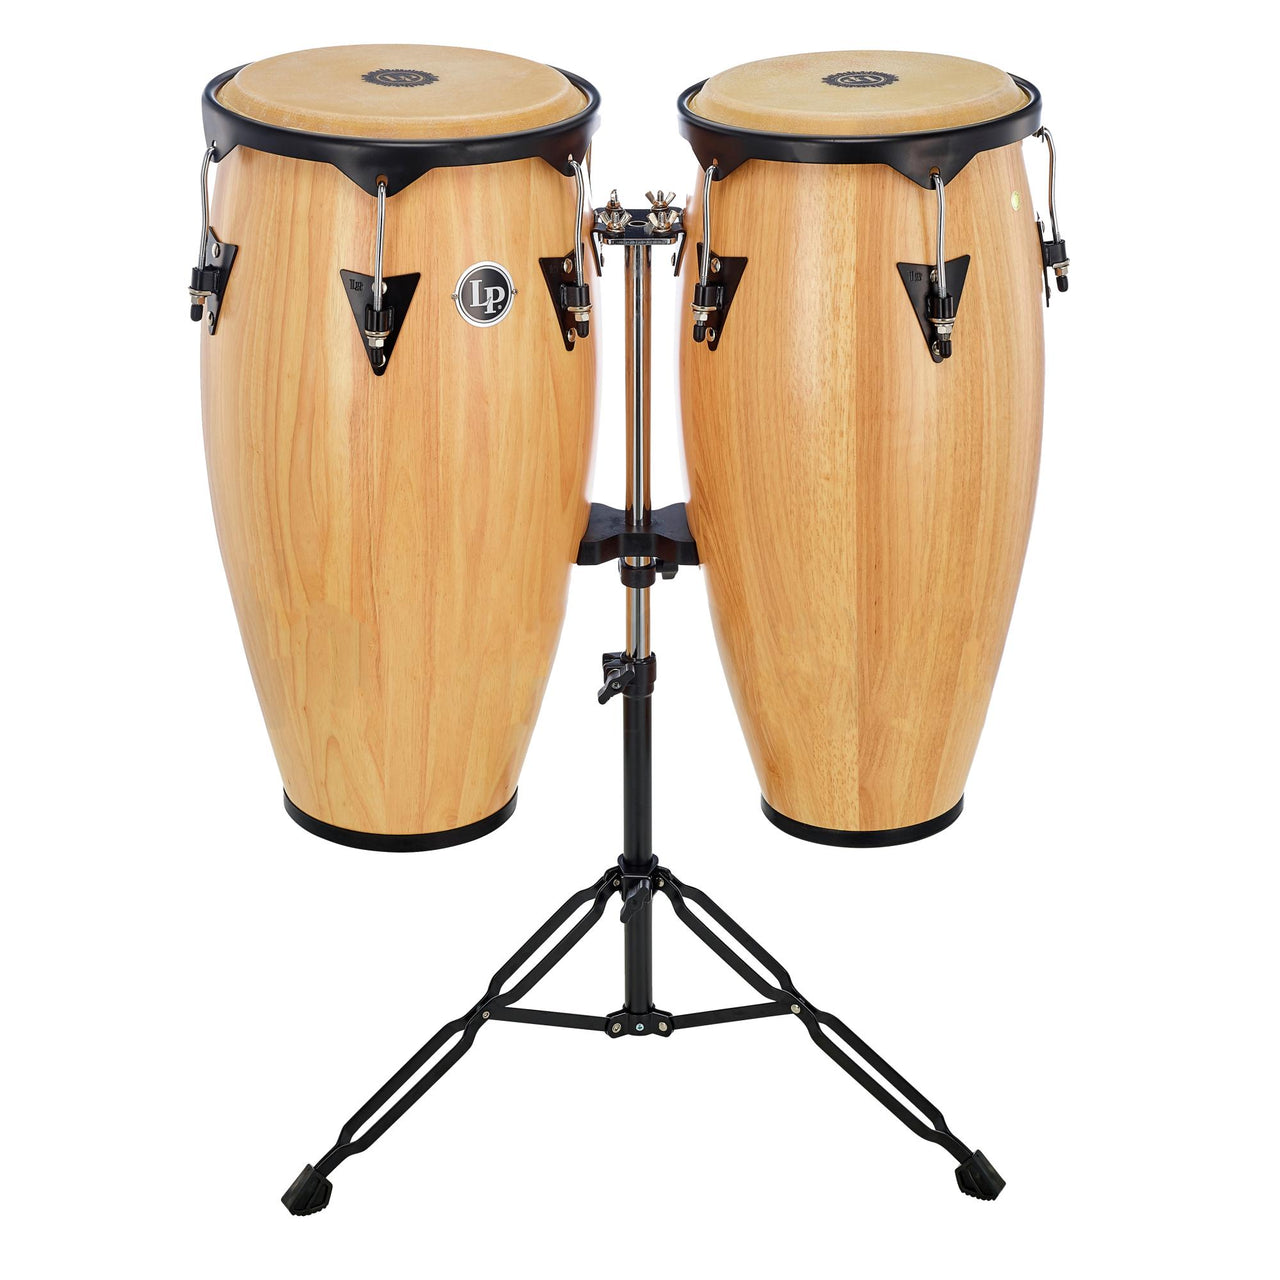 Congas Lp 10" Y 11" Natural, Lp646ny-aw